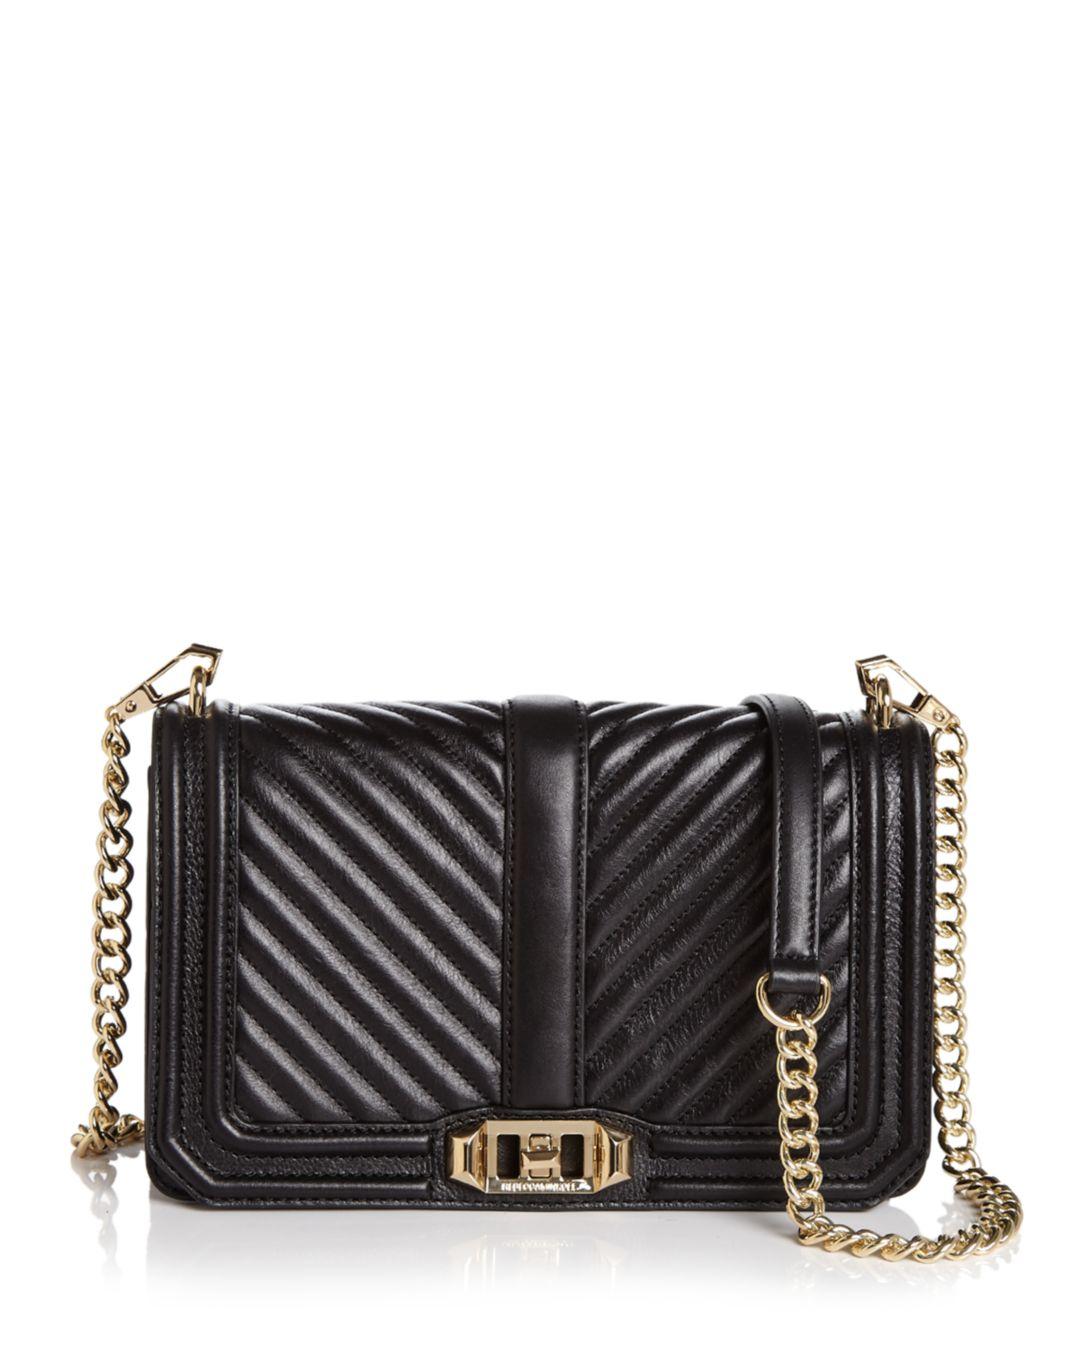 Rebecca Minkoff Love Chevron Quilted Leather Crossbody Bag in Black ...